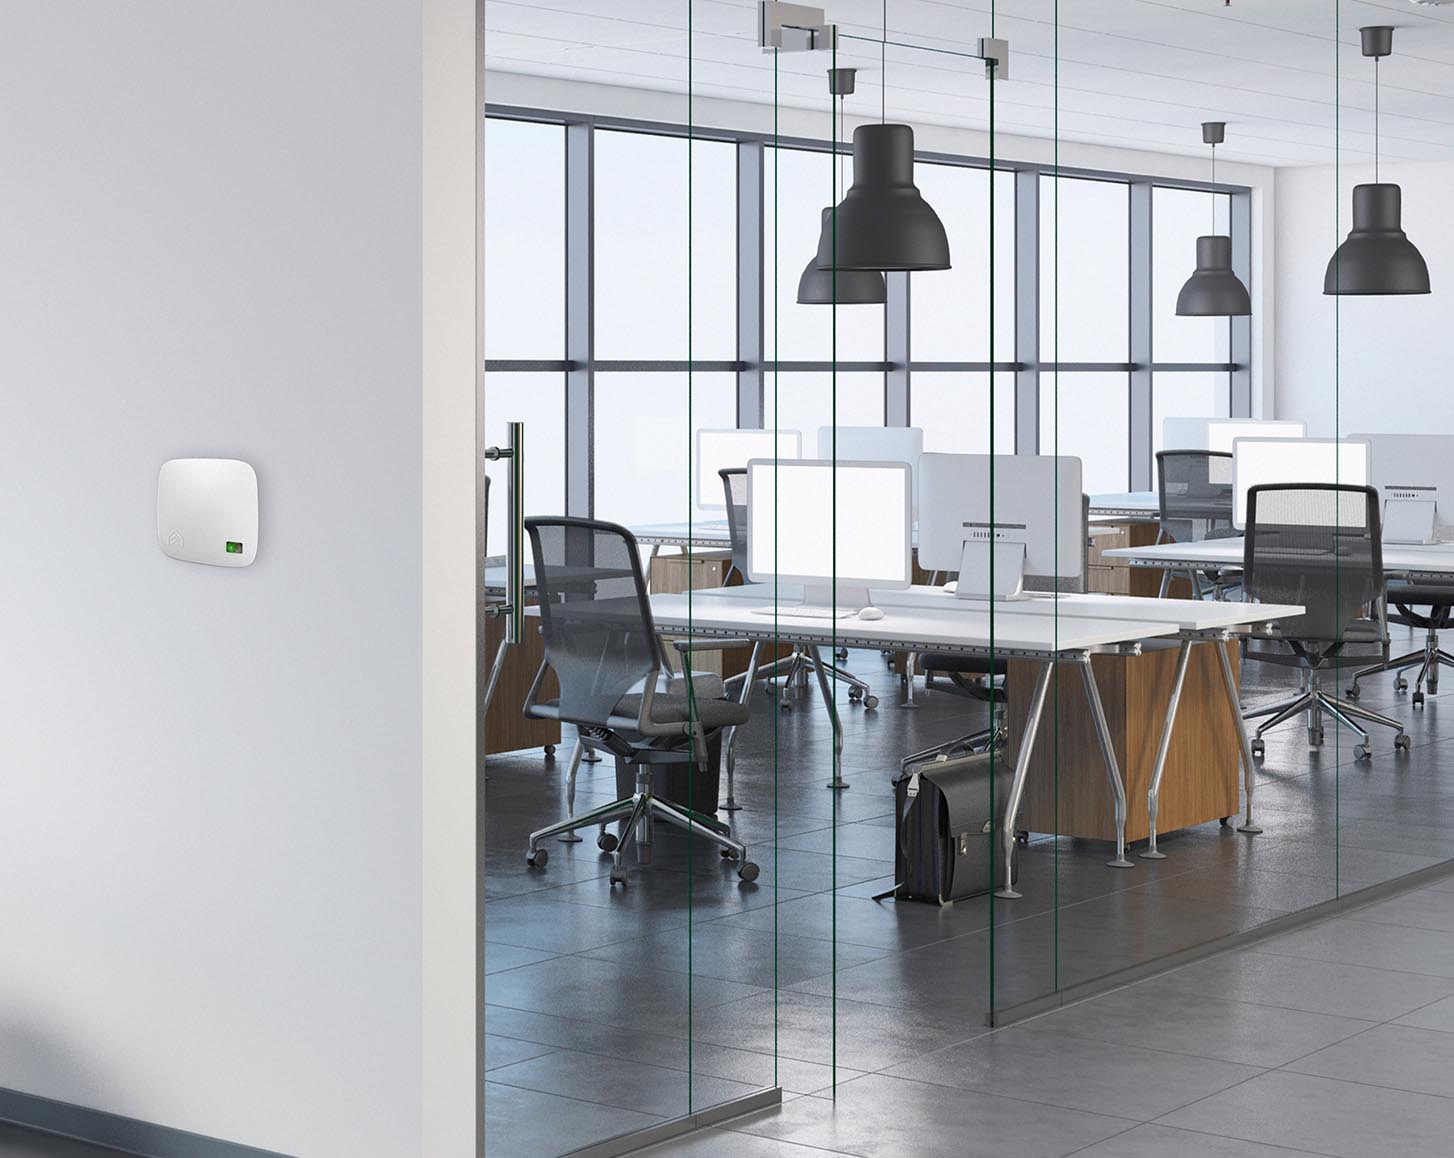 An AirSuite sensor on a wall, with office desks in the background